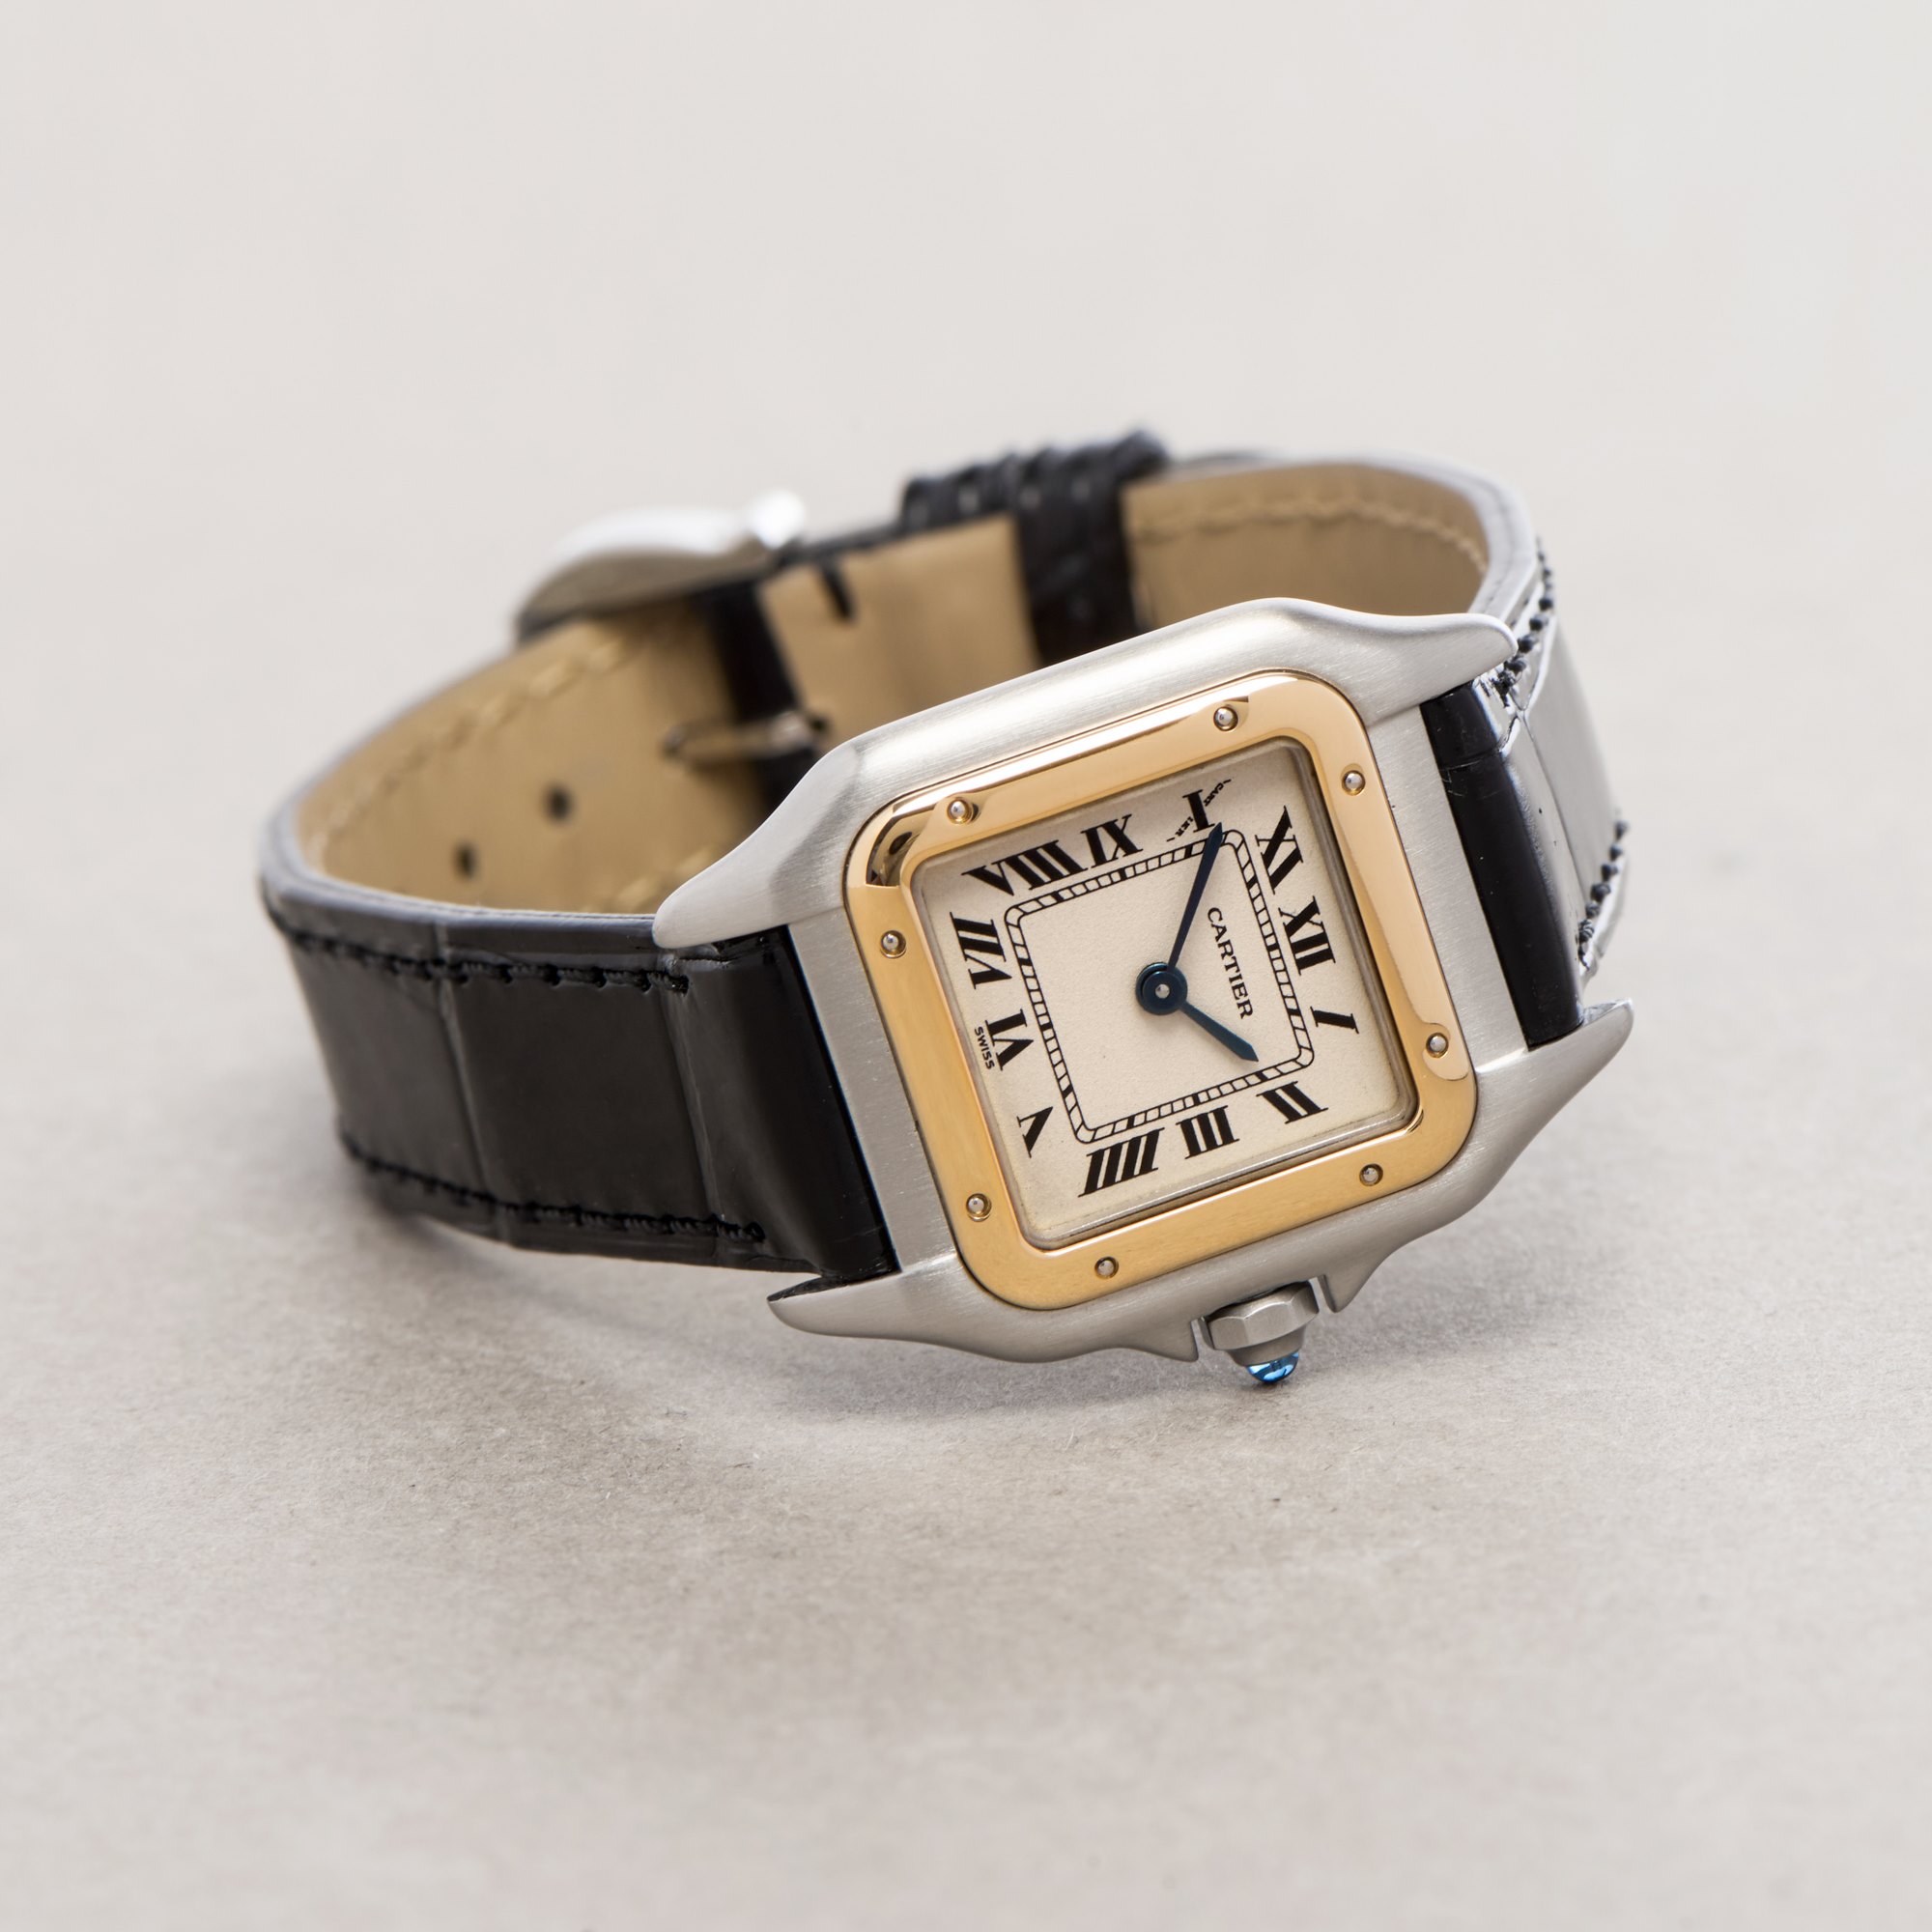 Cartier Panthère 18K Yellow Gold & Stainless Steel 1120